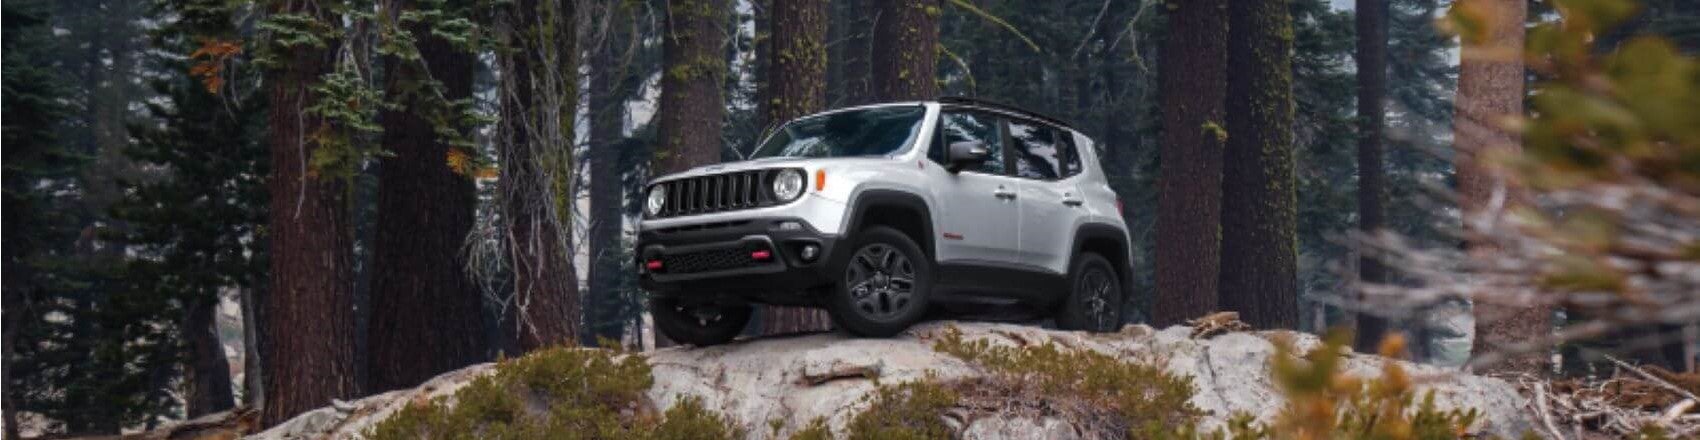 Jeep Renegade Snipped